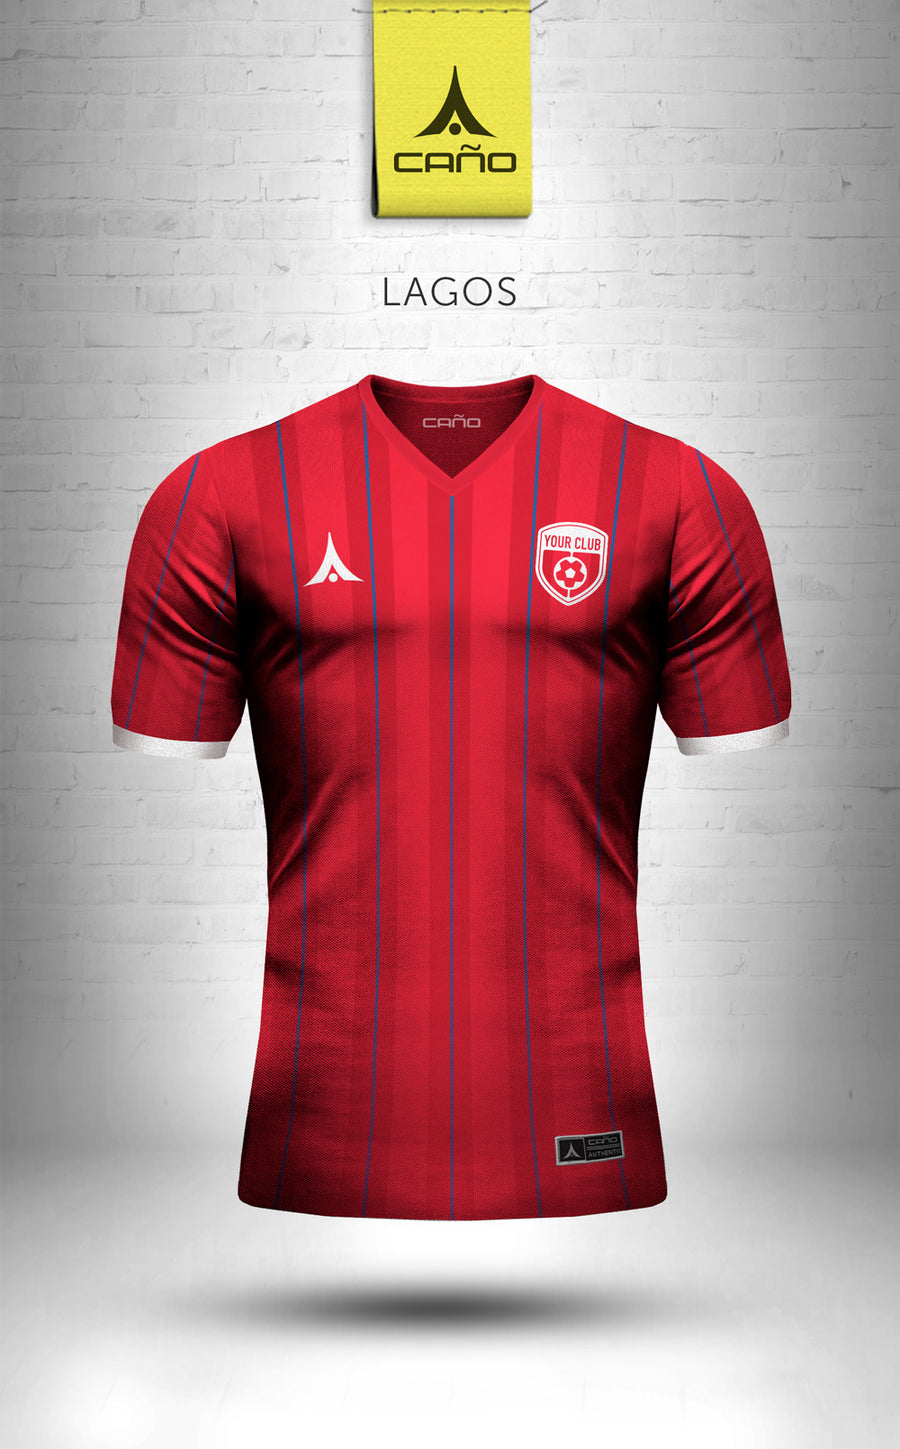 Lagos in red/blue/white